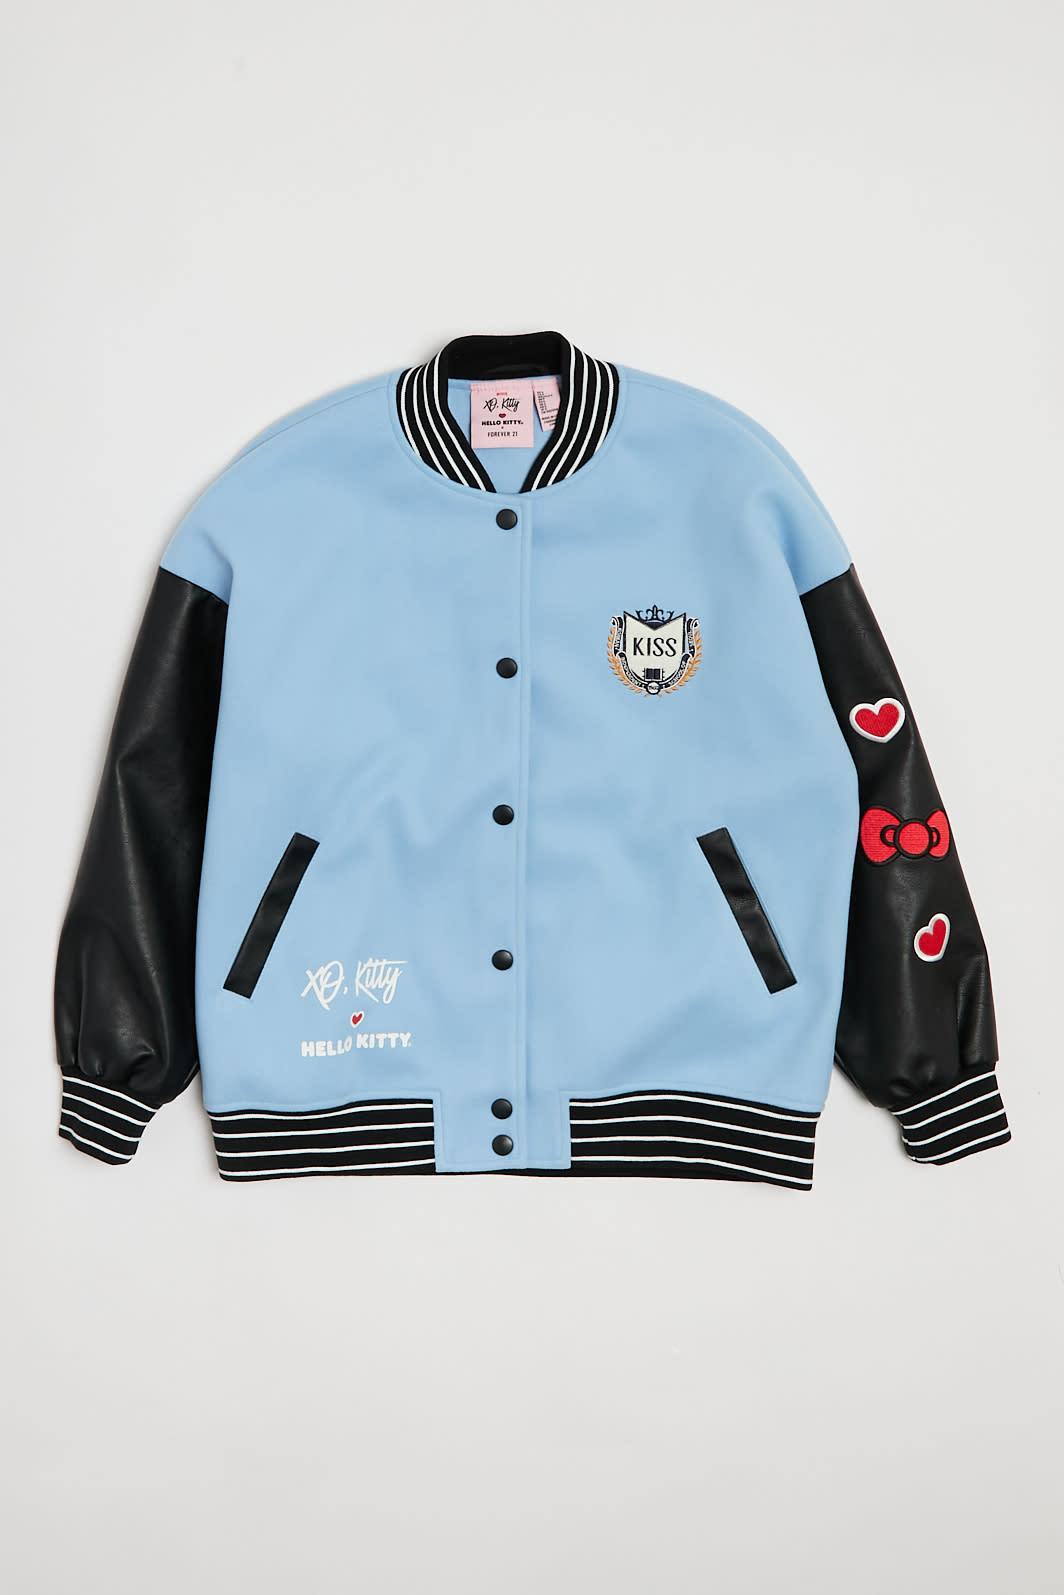 A varsity jacket is one of the items featured in the 